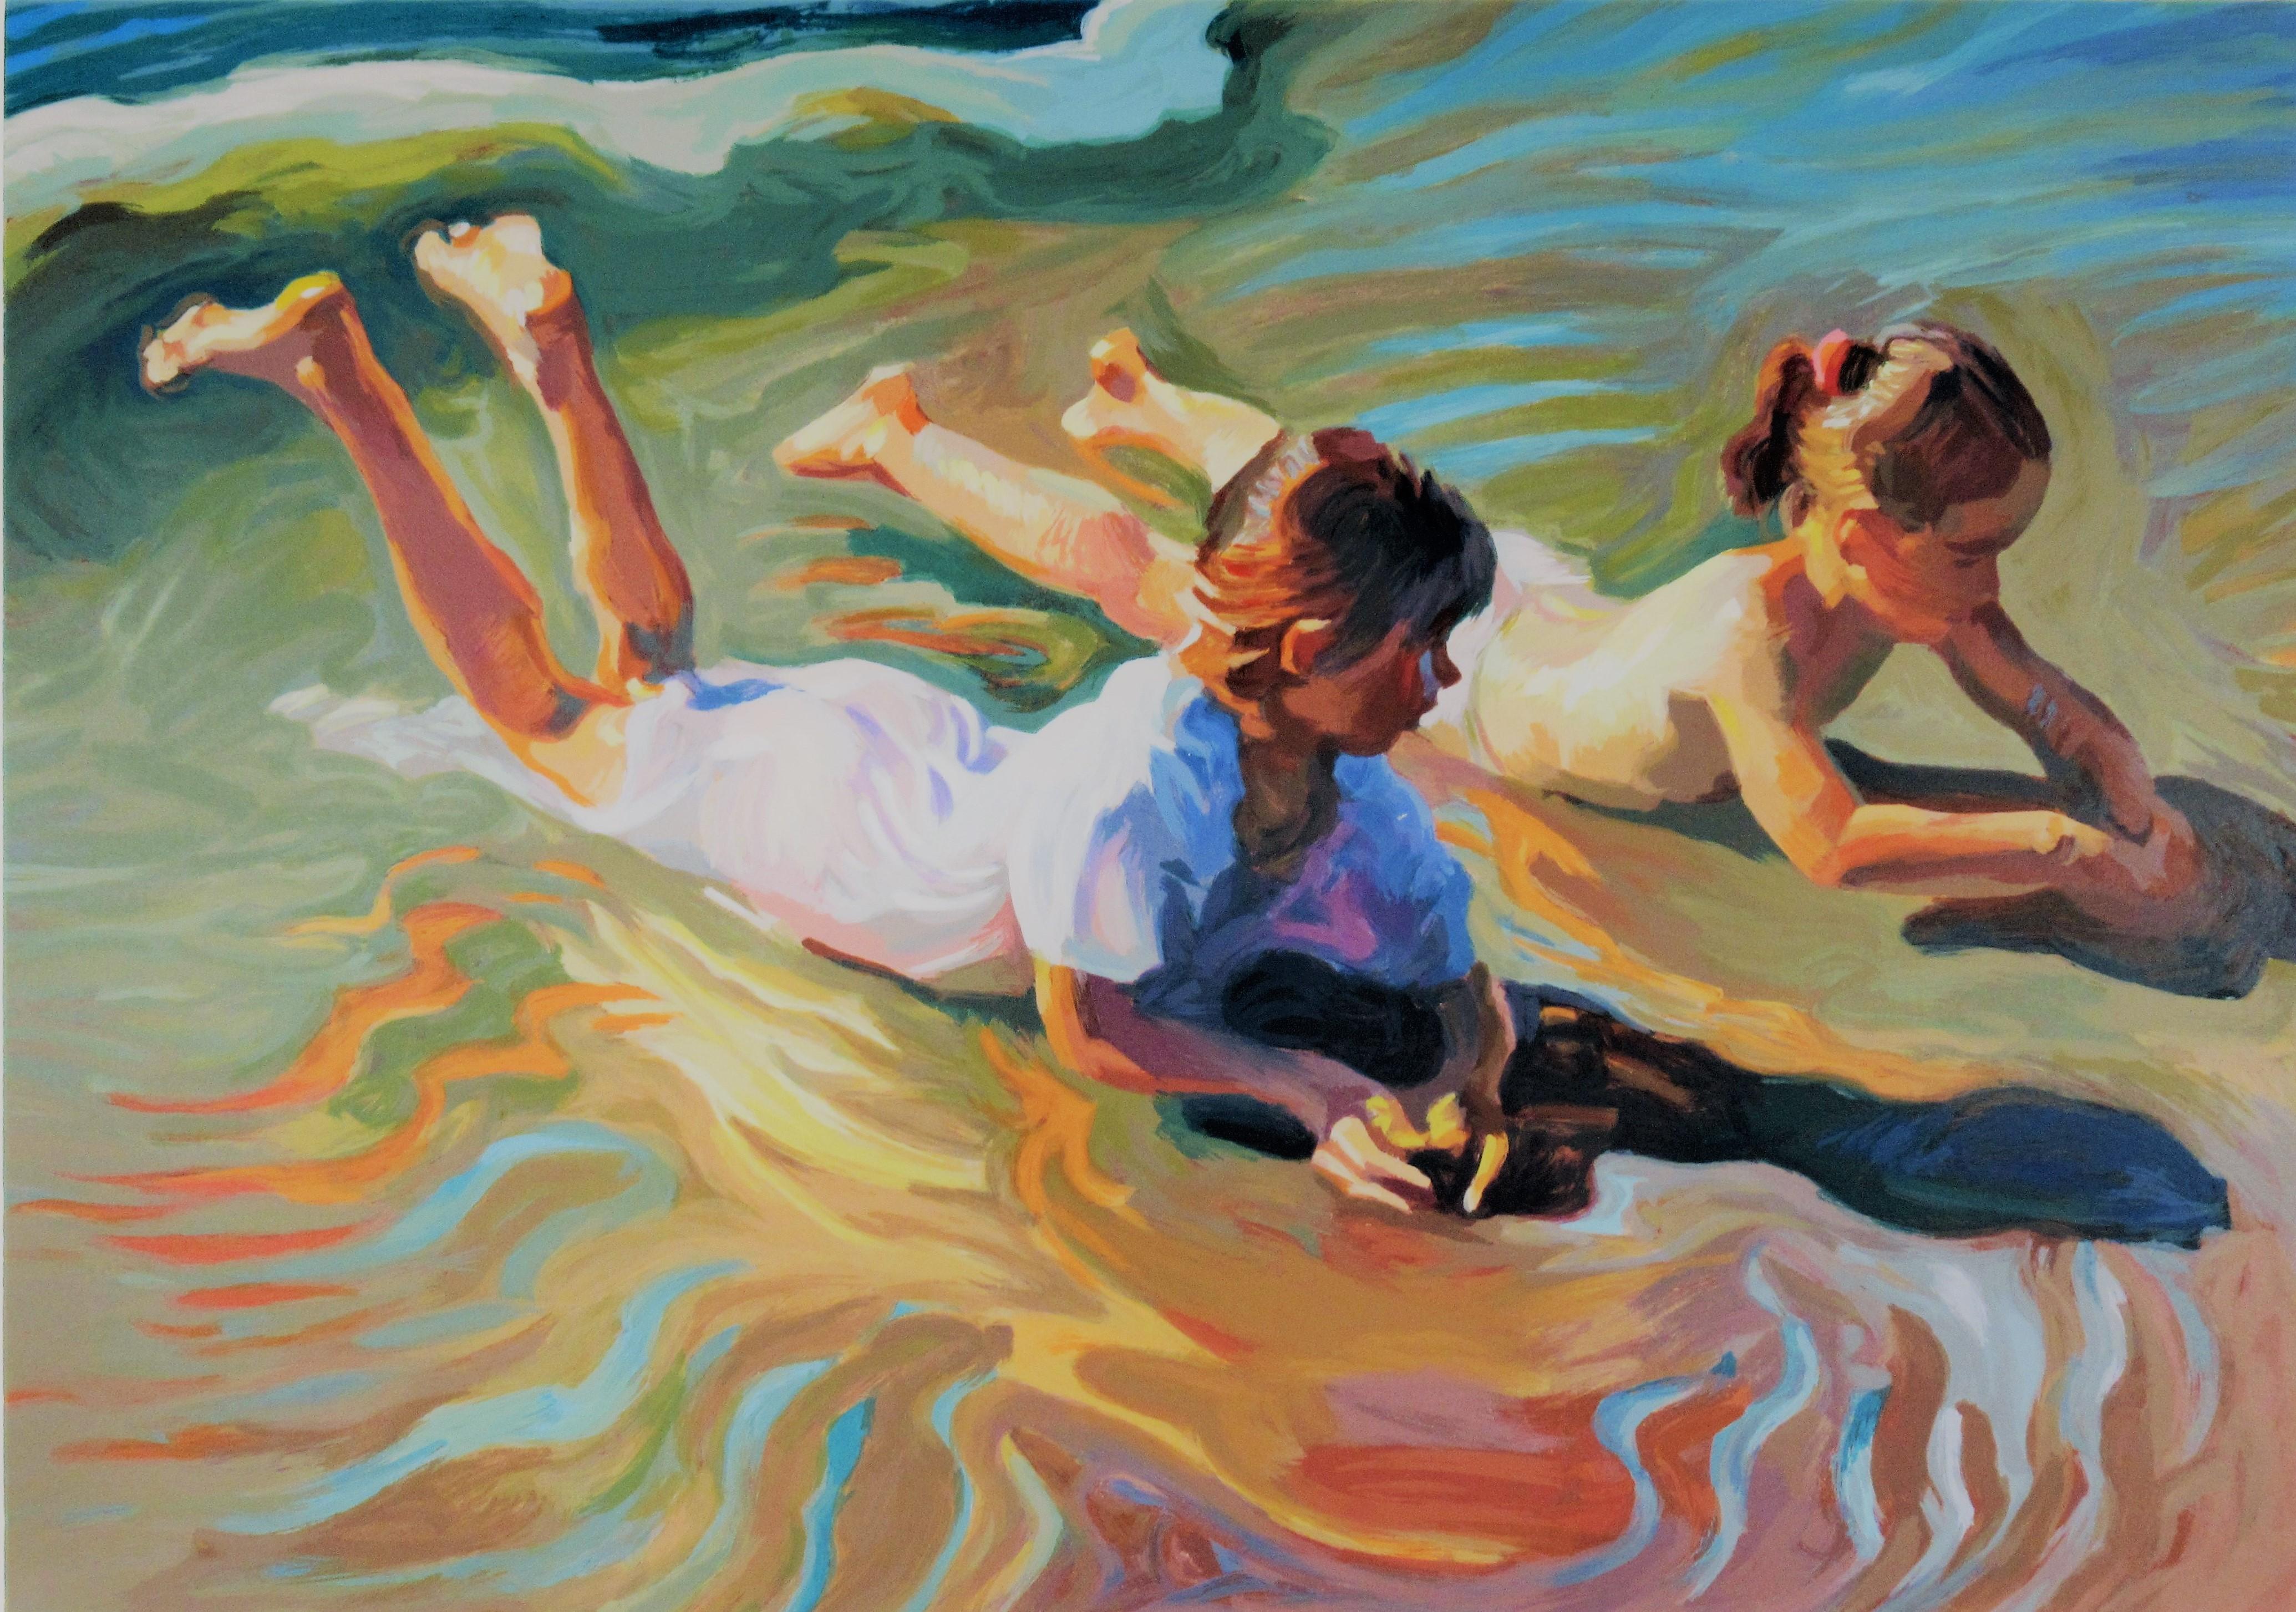 Two Young Girls at the Beach, large color seigraph - Print by John Asaro